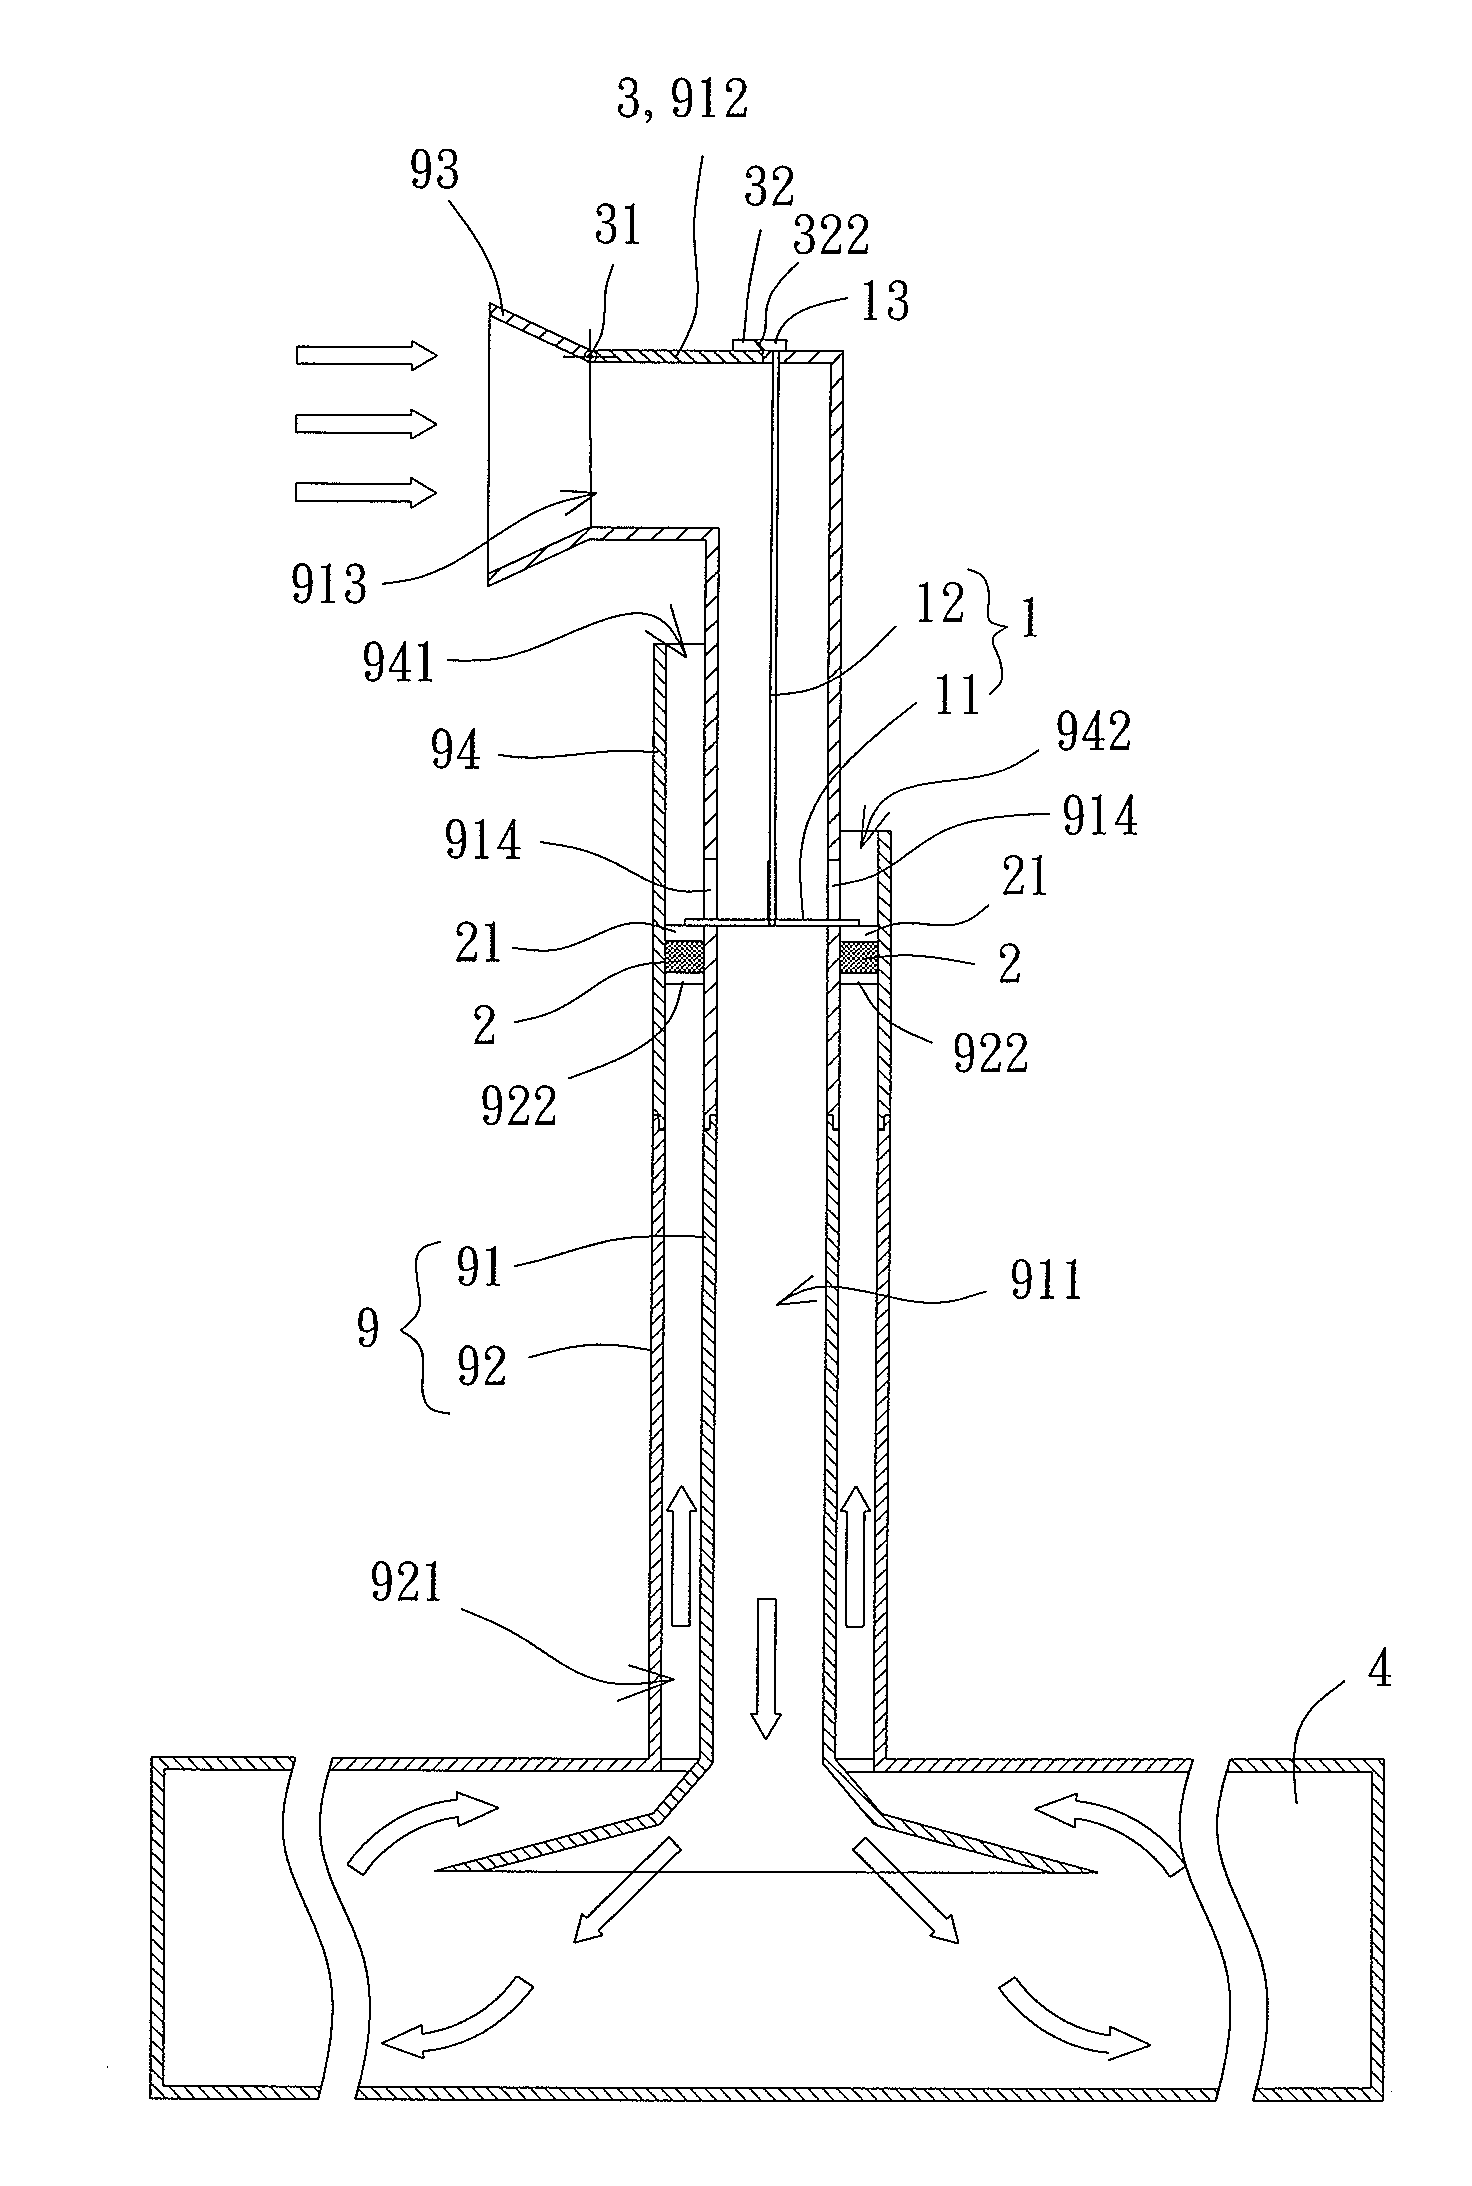 Ventilation System with Controllable Air Input and Output